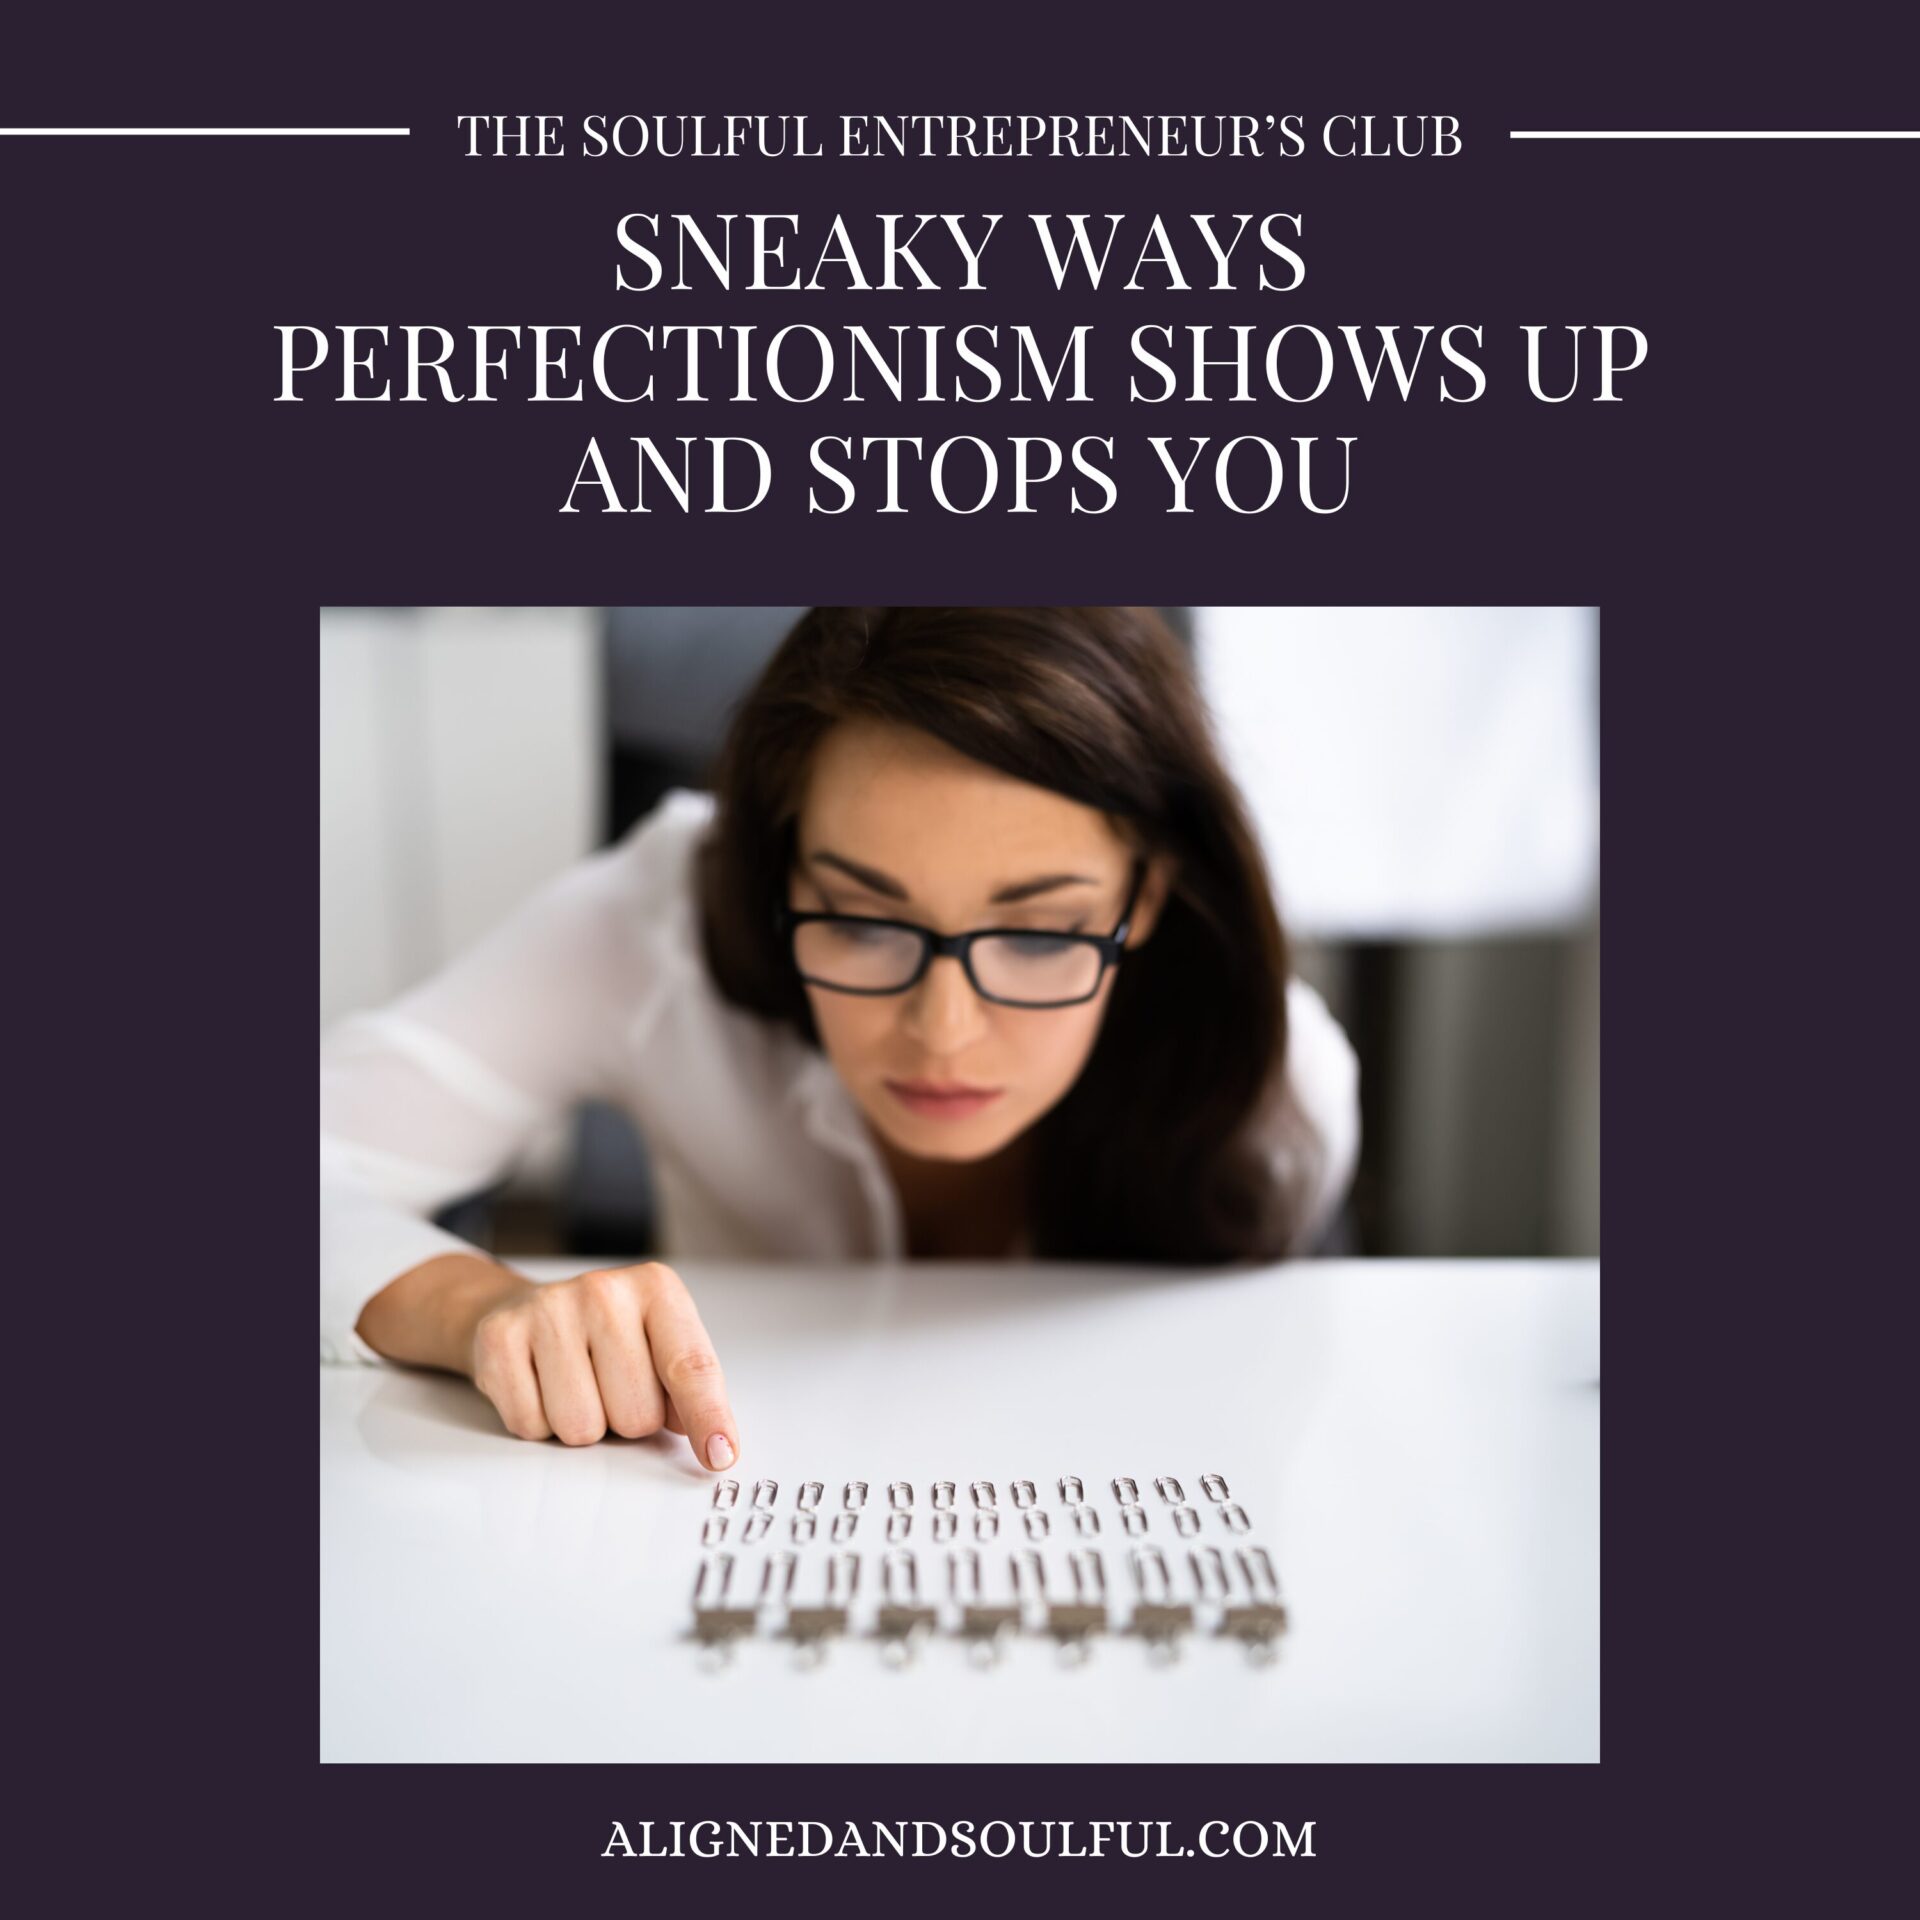 Sneaky ways Perfectionism shows up and stops you